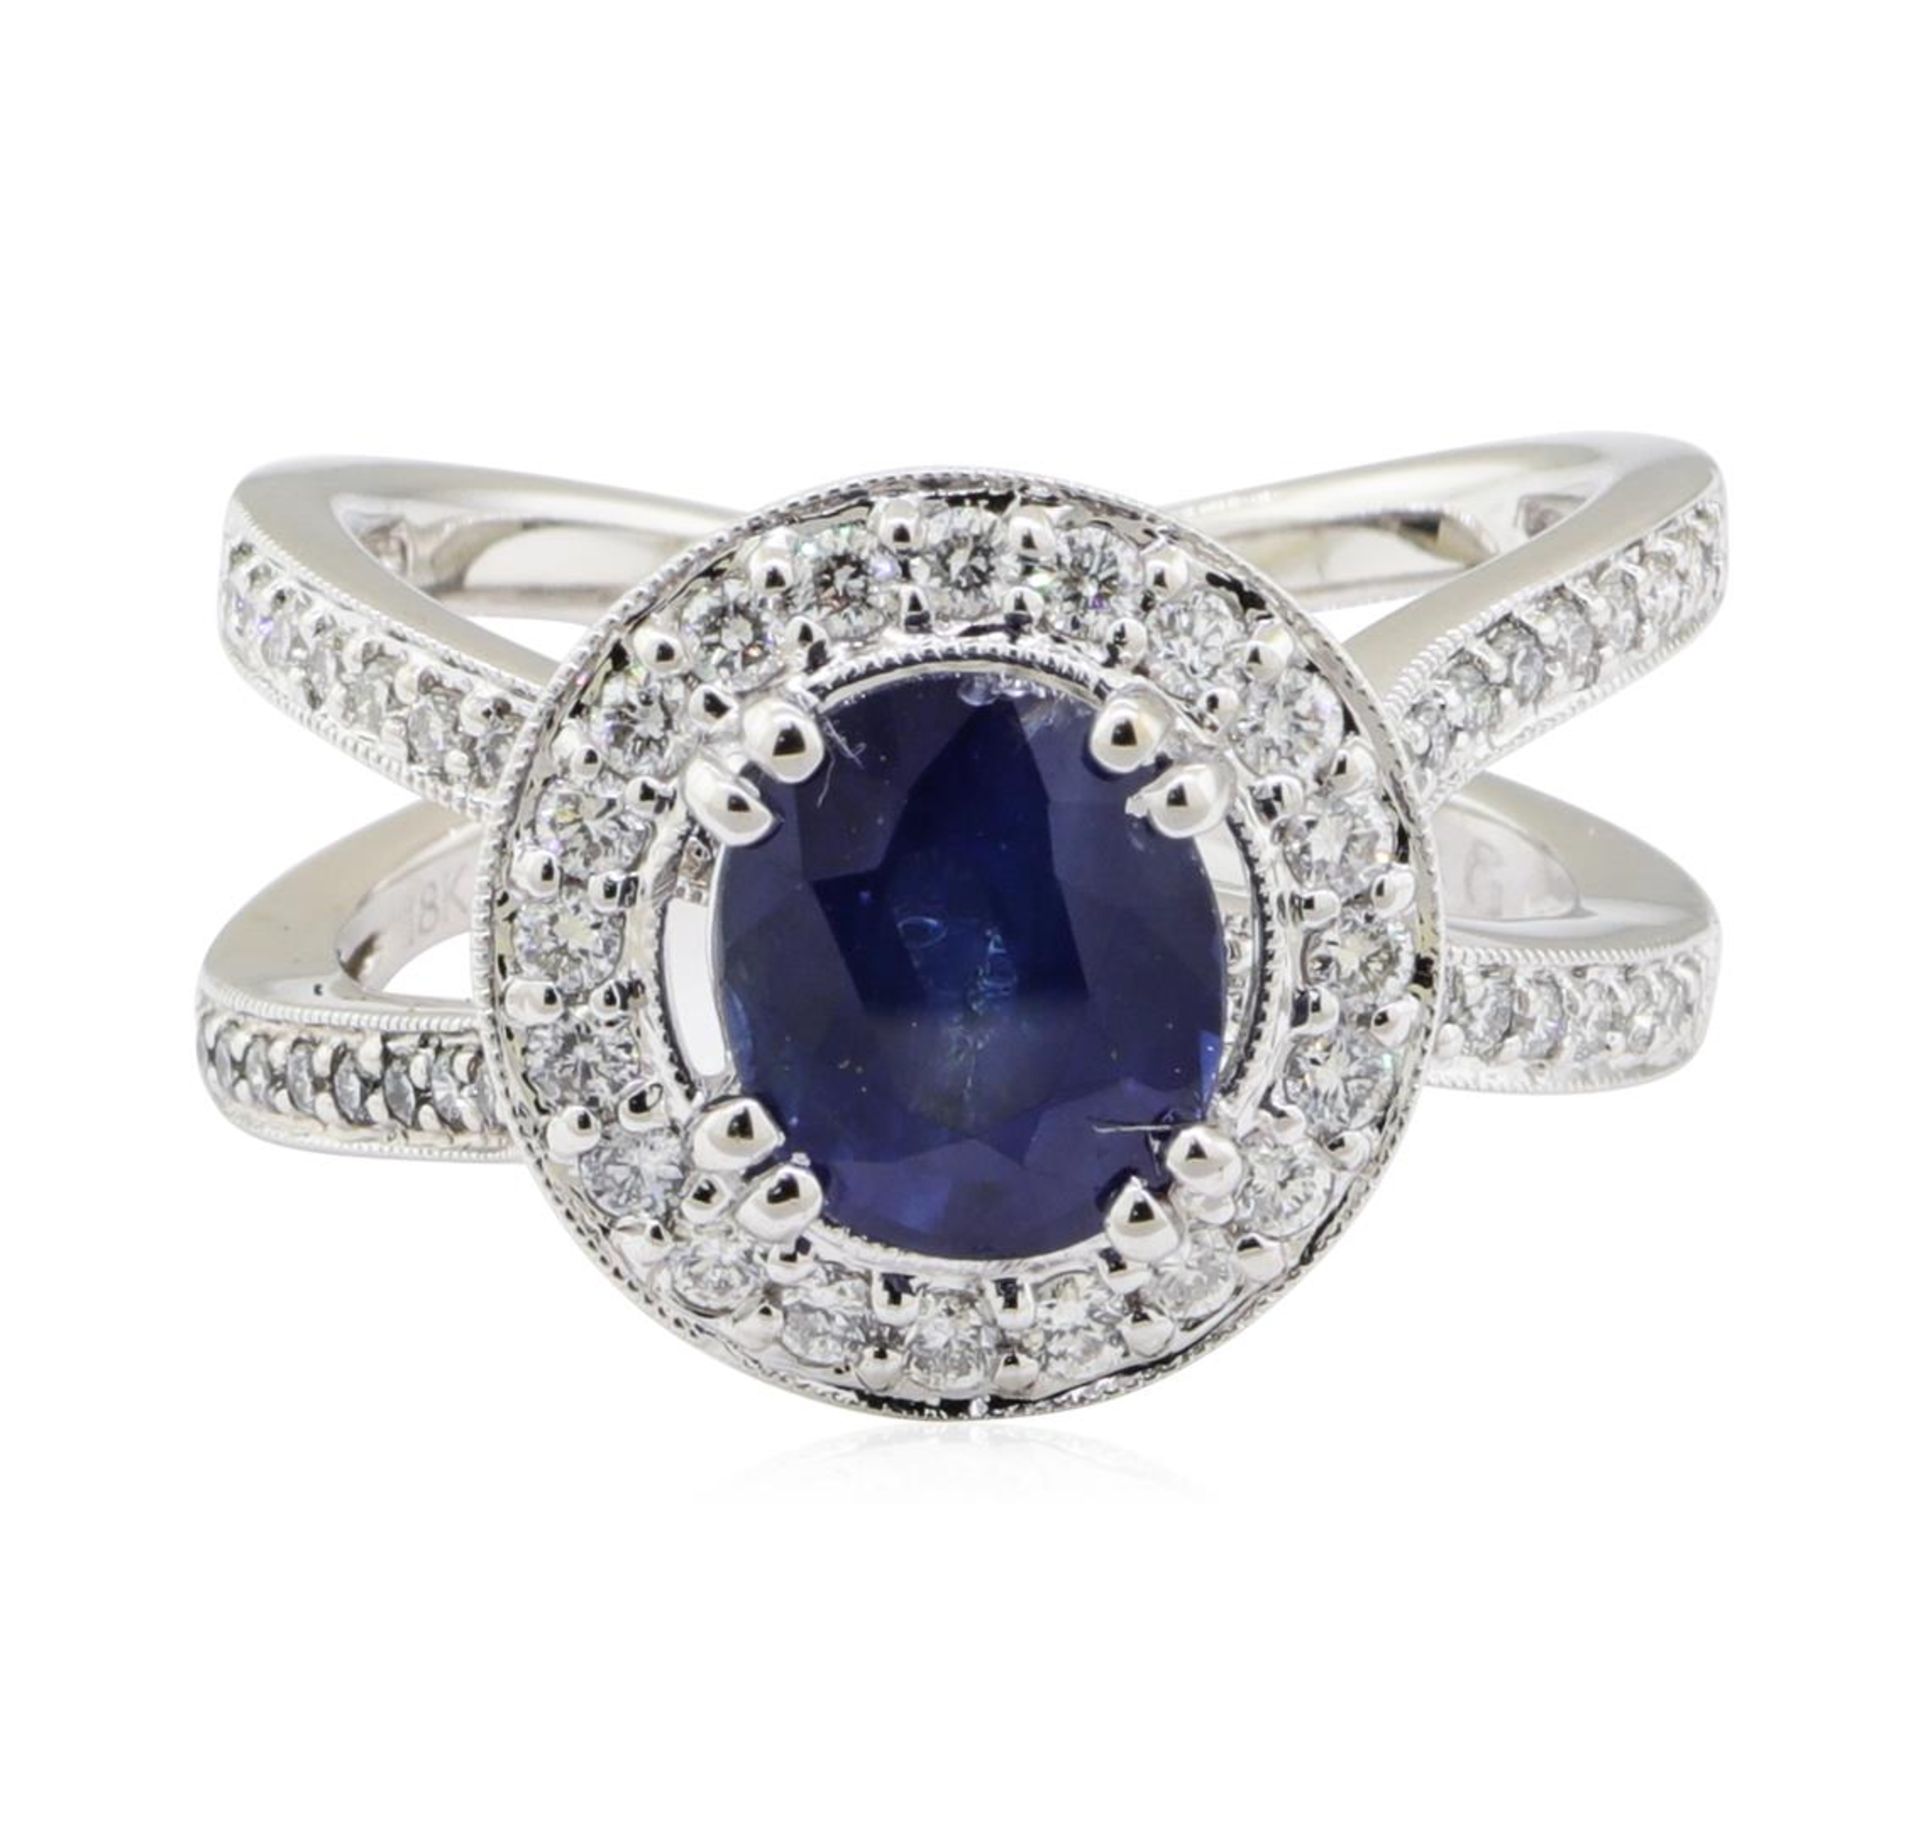 2.69 ctw Sapphire and Diamond Ring - 18KT White Gold - Image 2 of 5